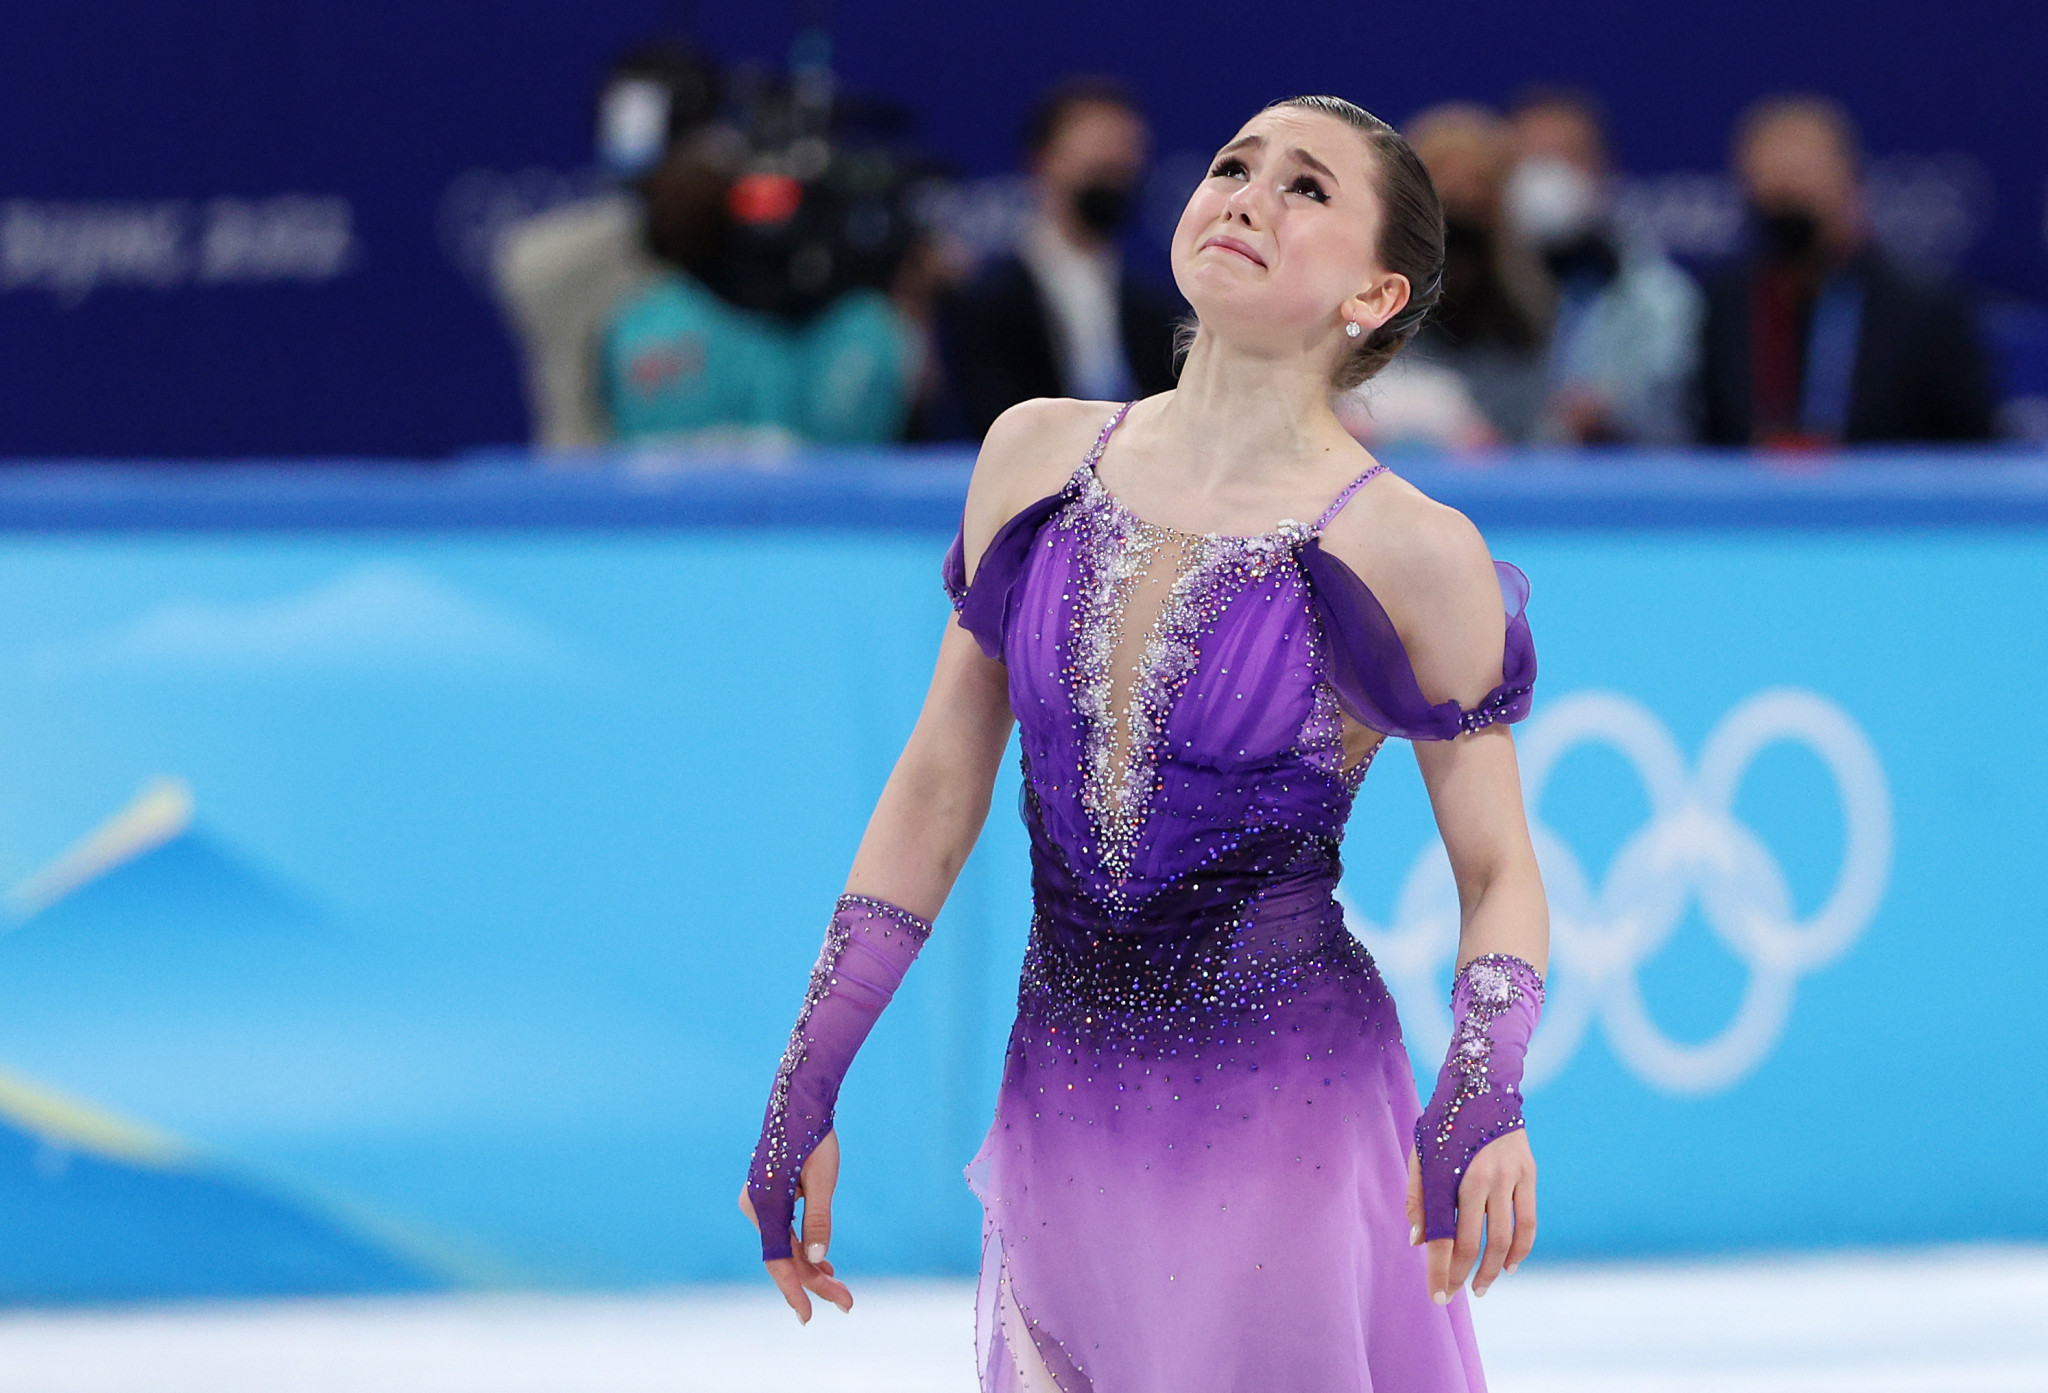 Kamila Valieva crying after her ice skating performance